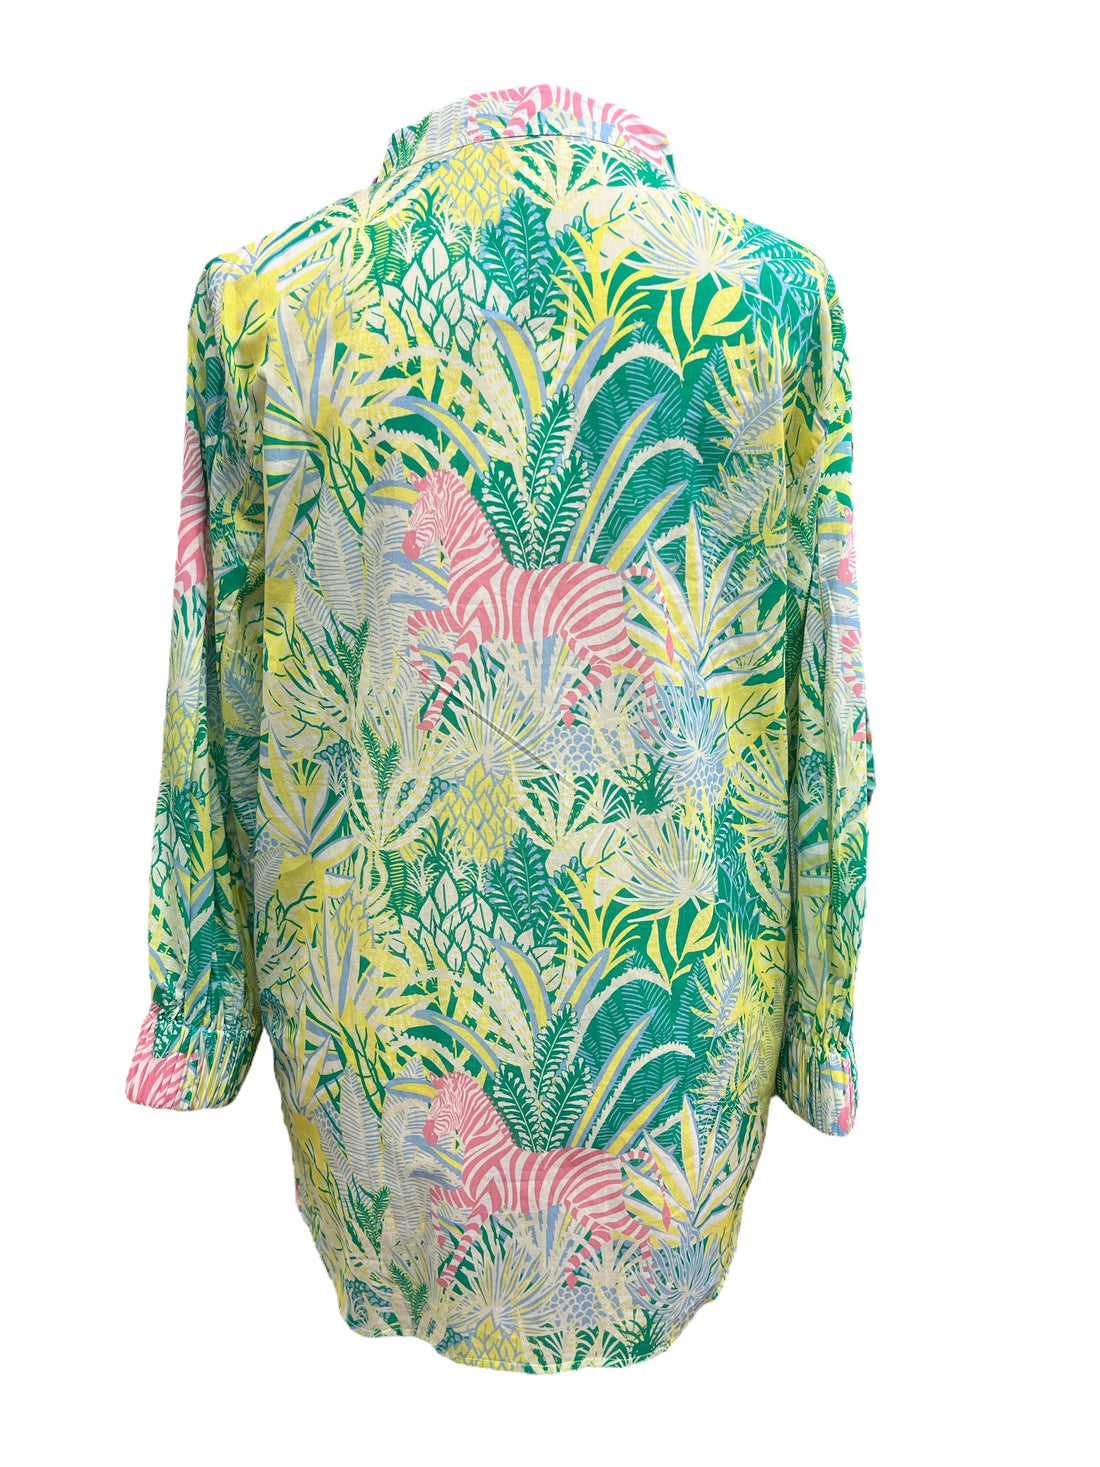 Sheridan French | Olive Tunic in Pink Punch Zebra Soirée